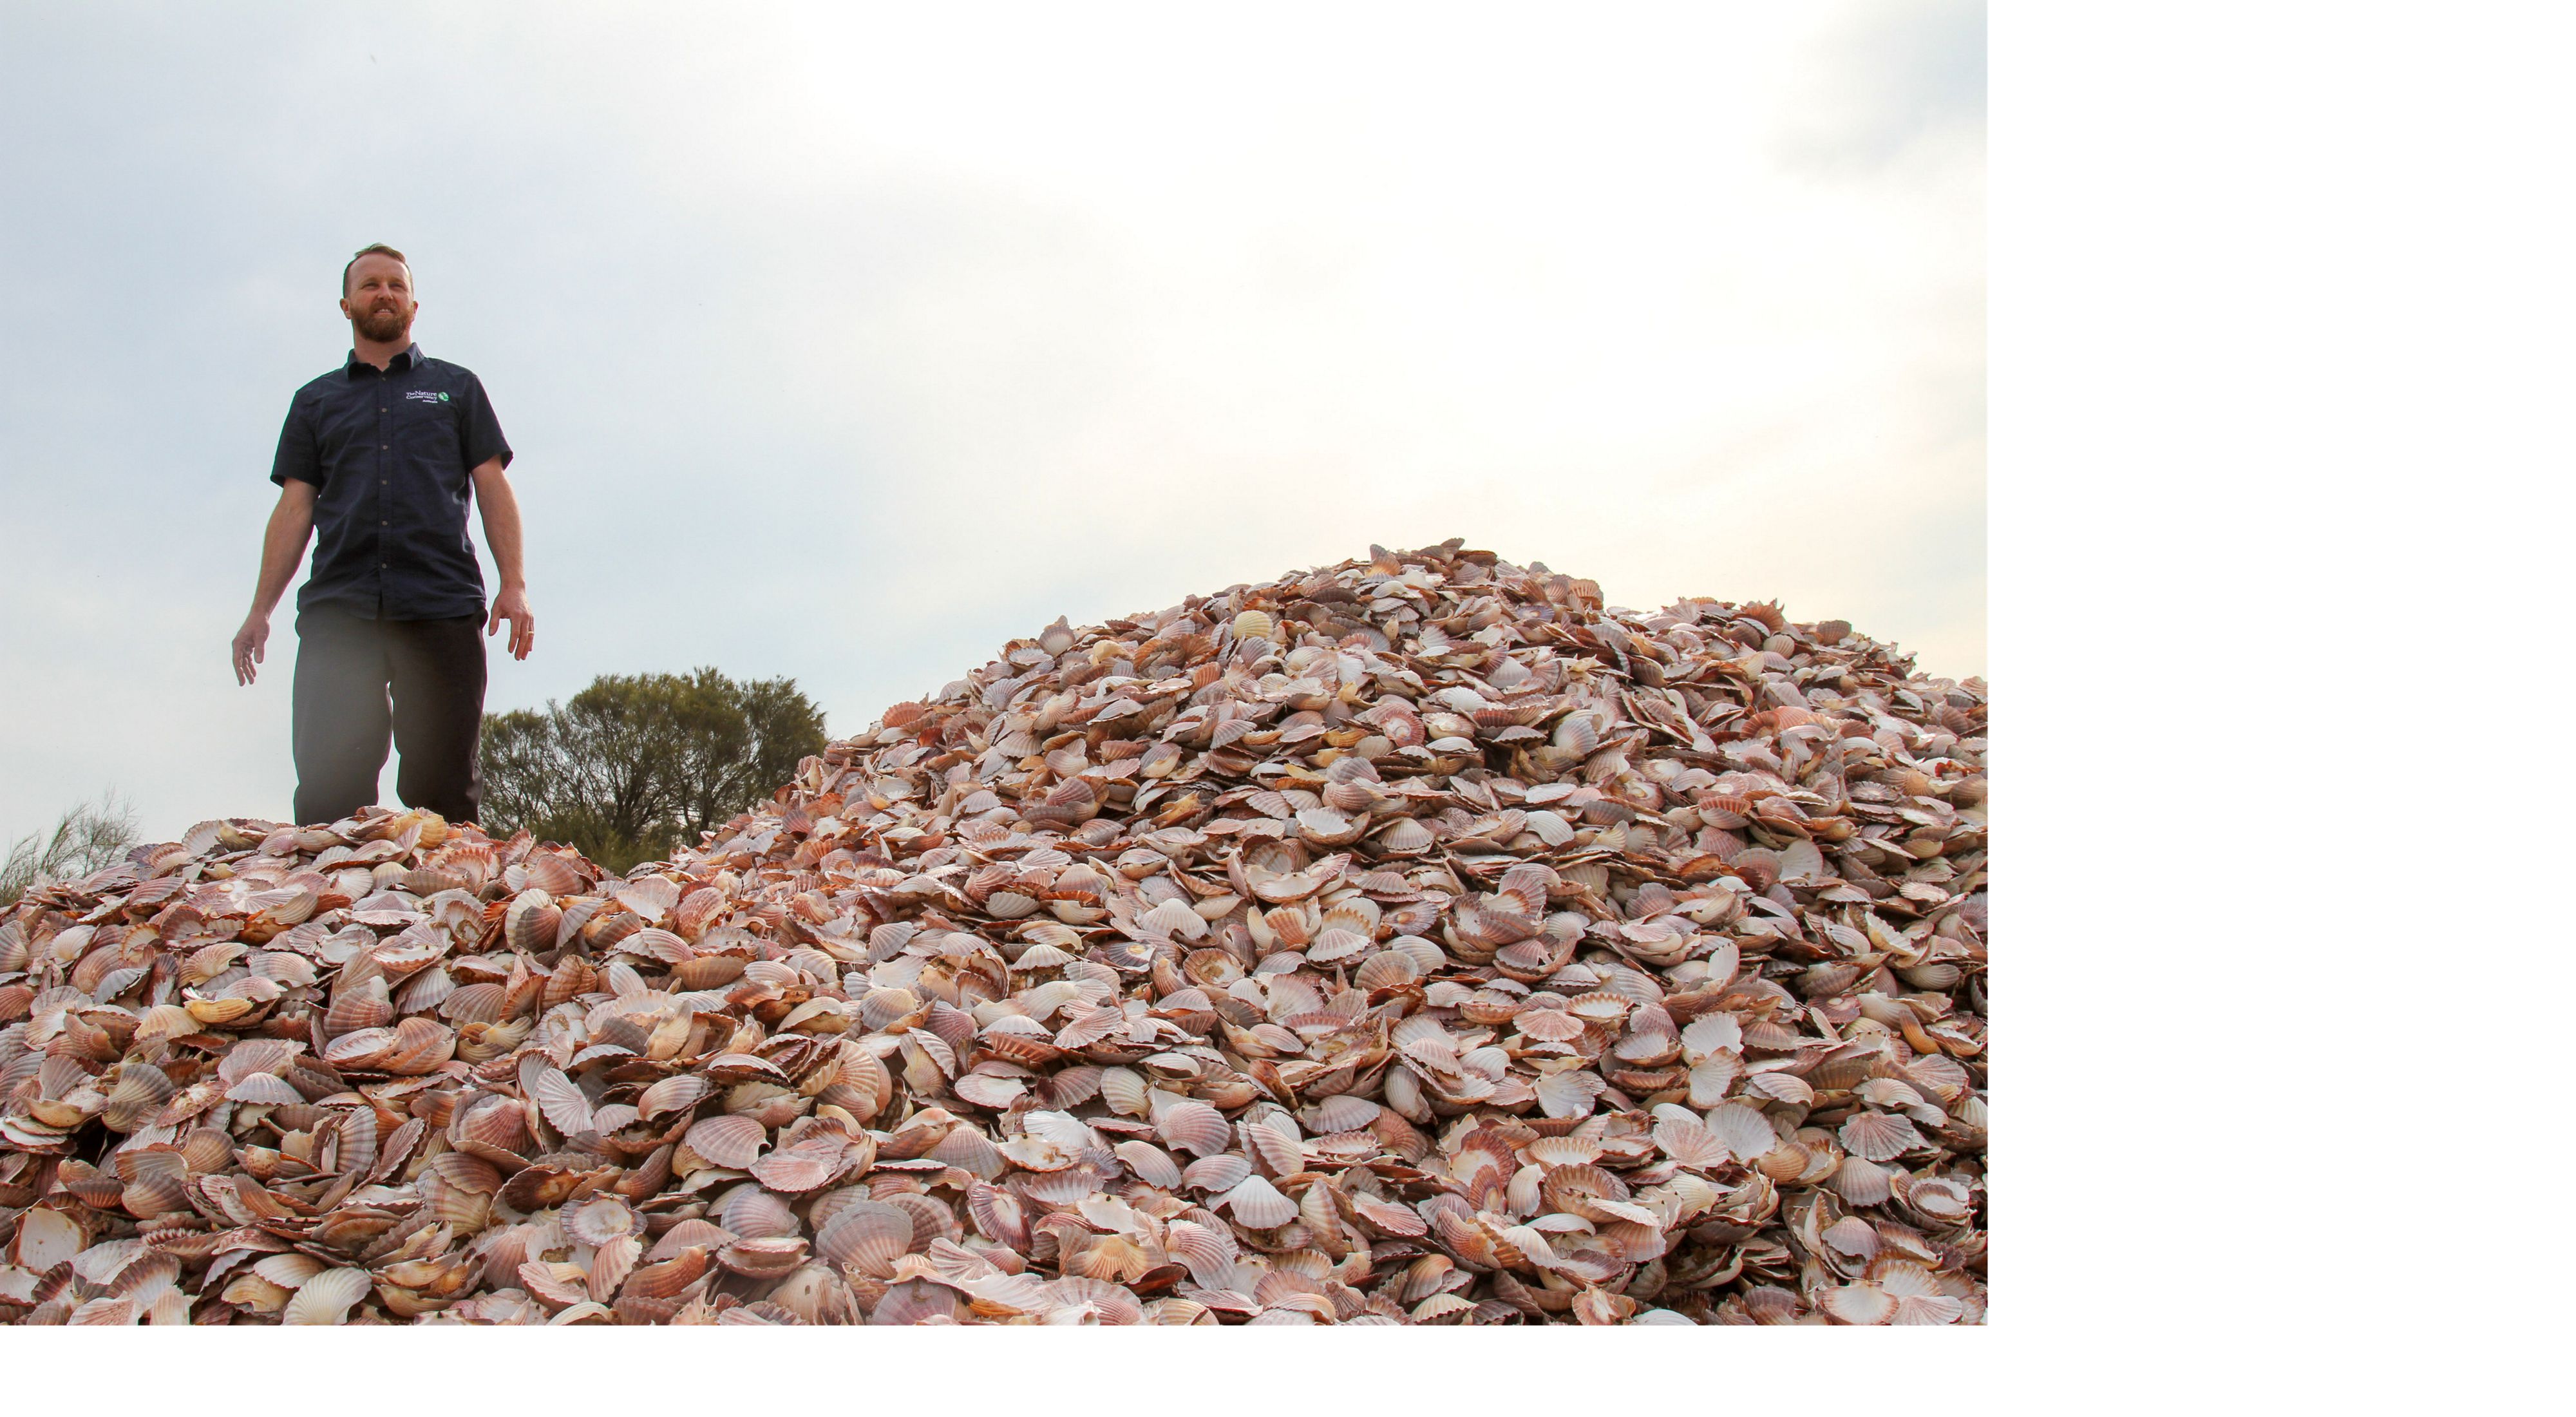 rides a wave of recycled seashells destined to become bedrock for new shellfish reefs